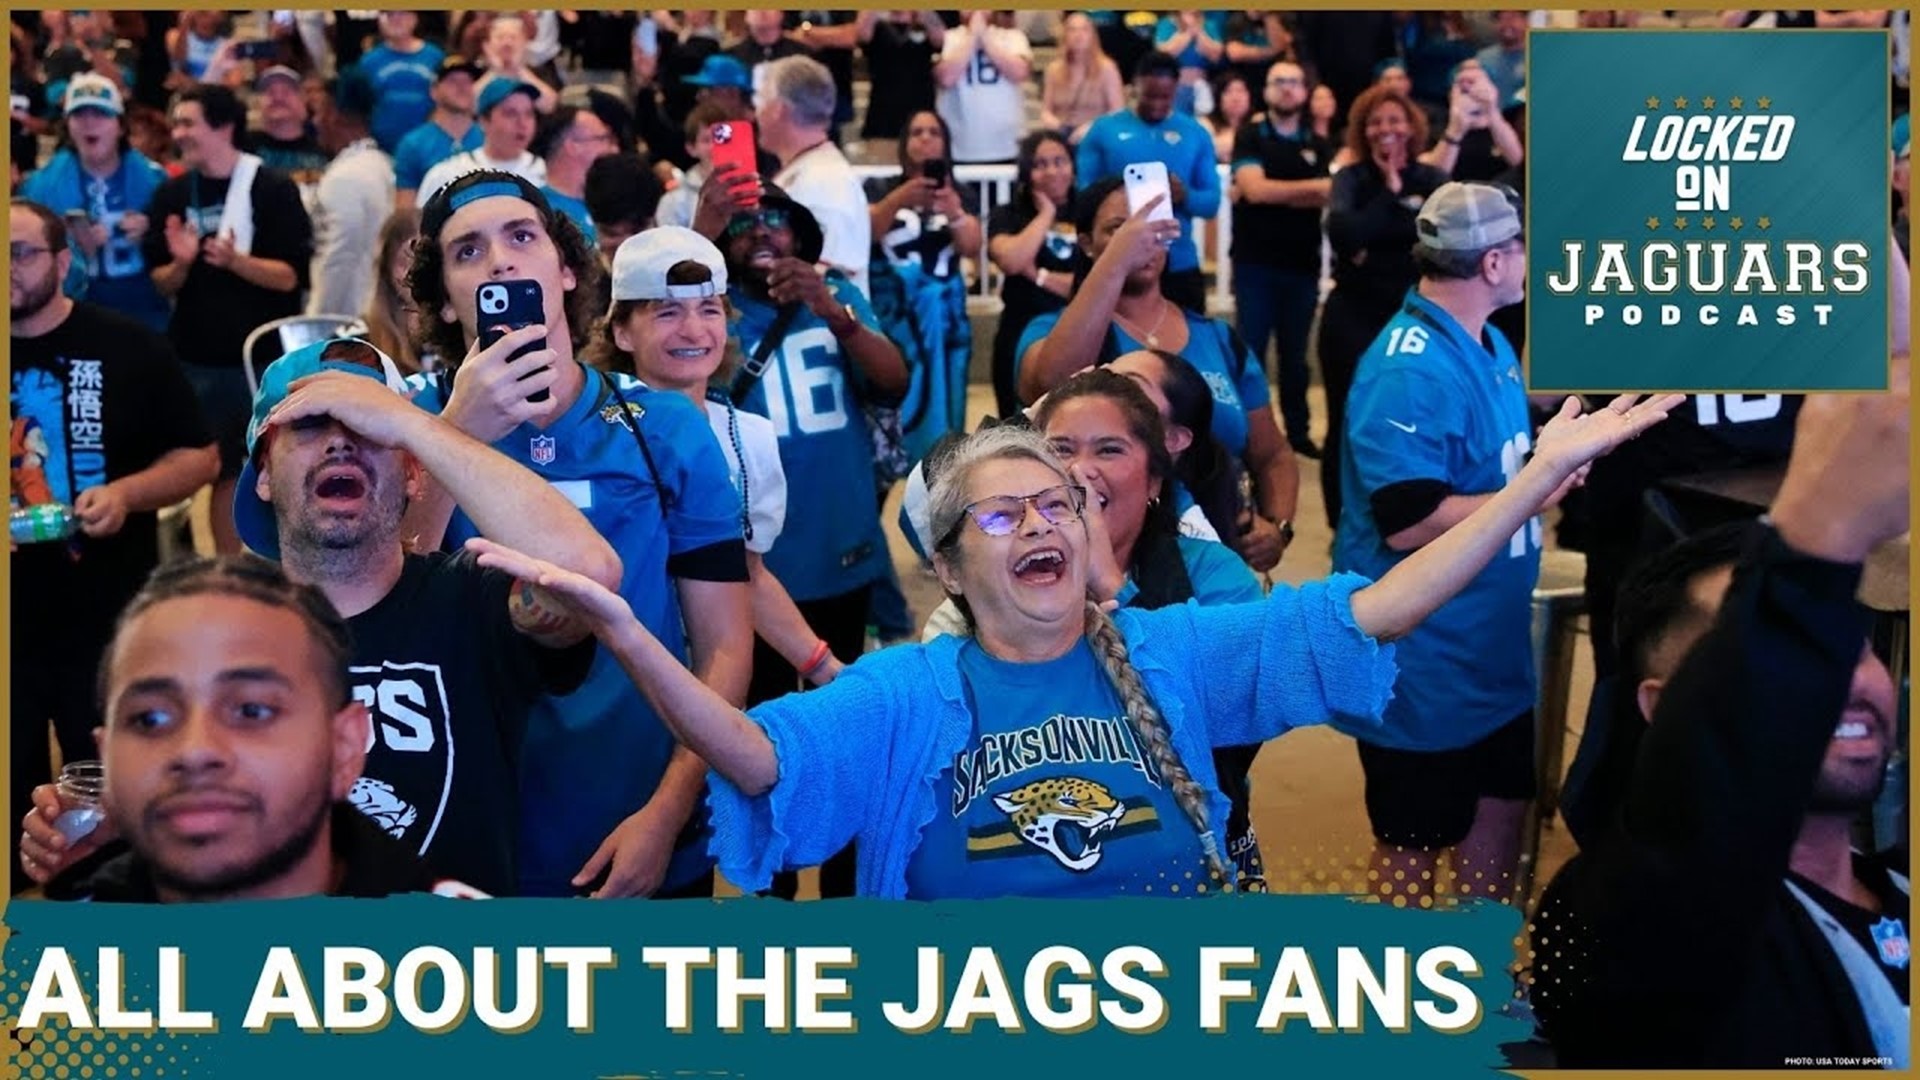 The Jacksonville Jaguars are always the subject of negative press and the fans may be weary. But we look at things differently that will give you a different outlook